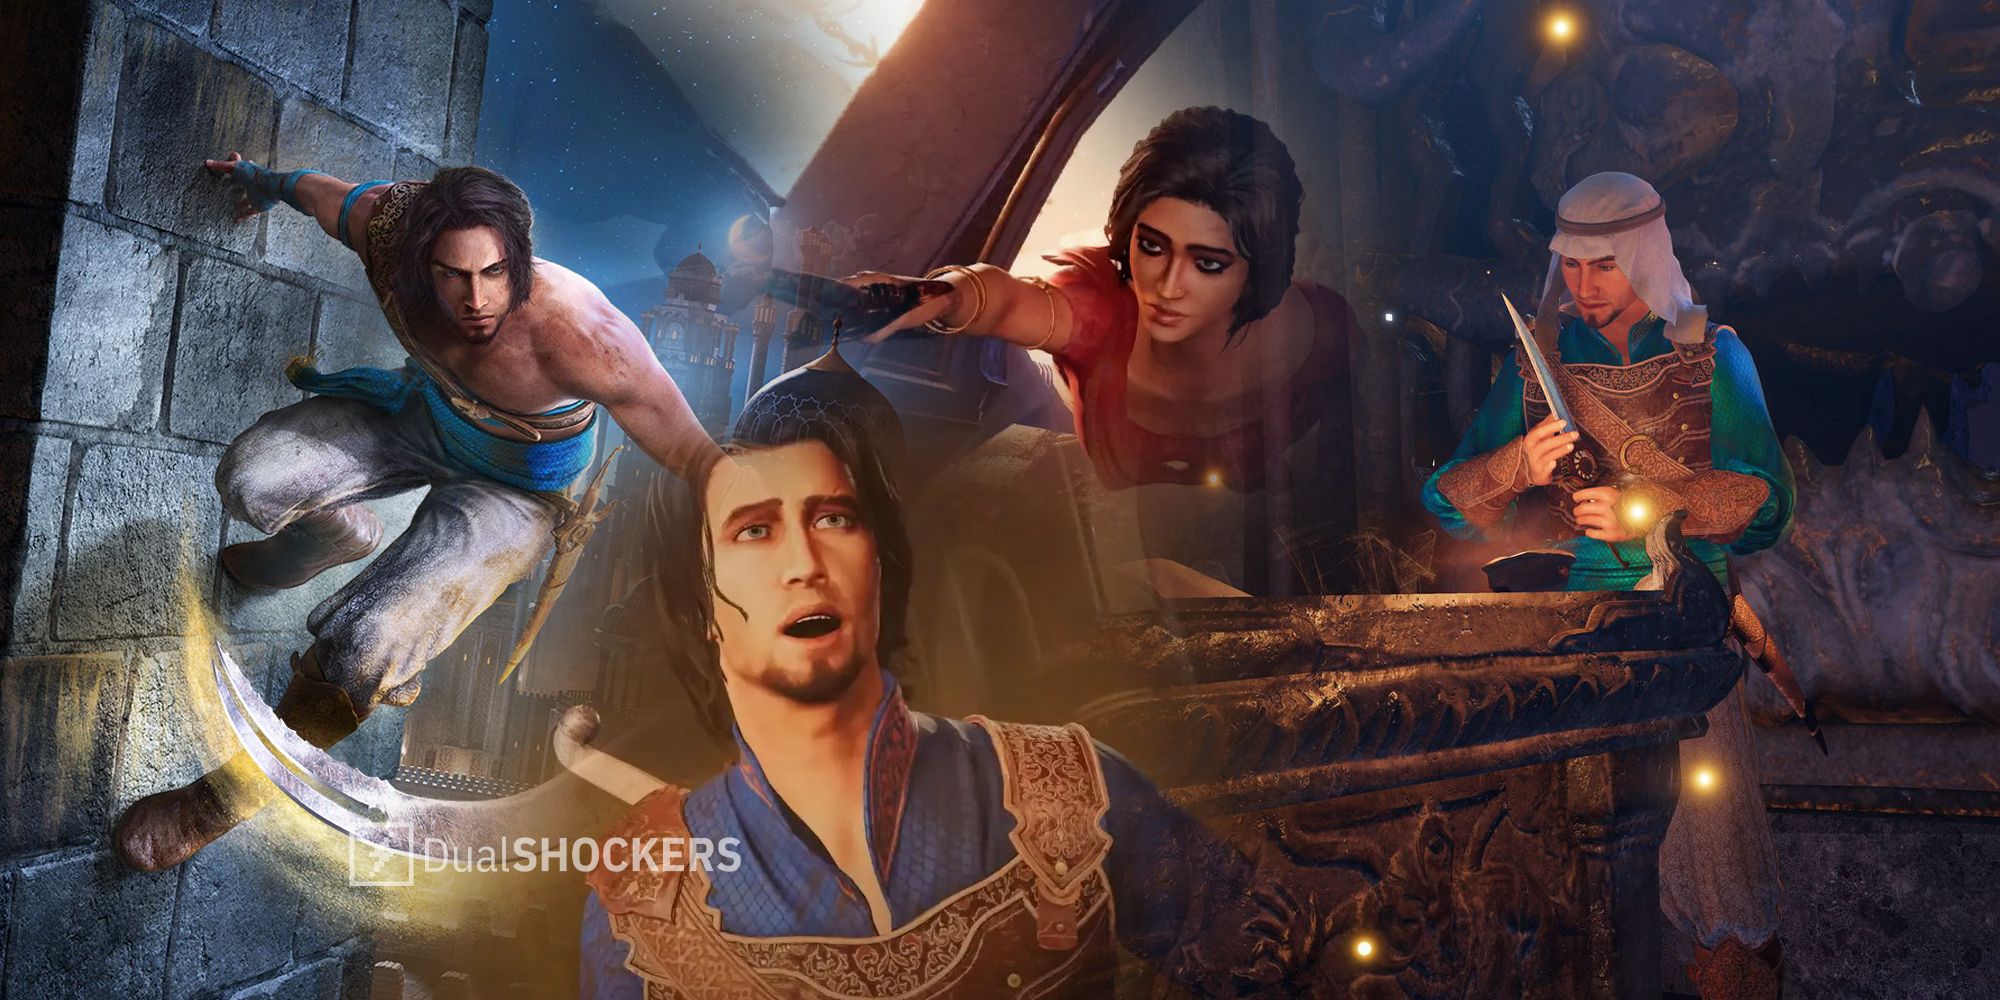 Prince Of Persia Creator Addresses 'Lost Crown' Controversy Surrounding In  The Best Way